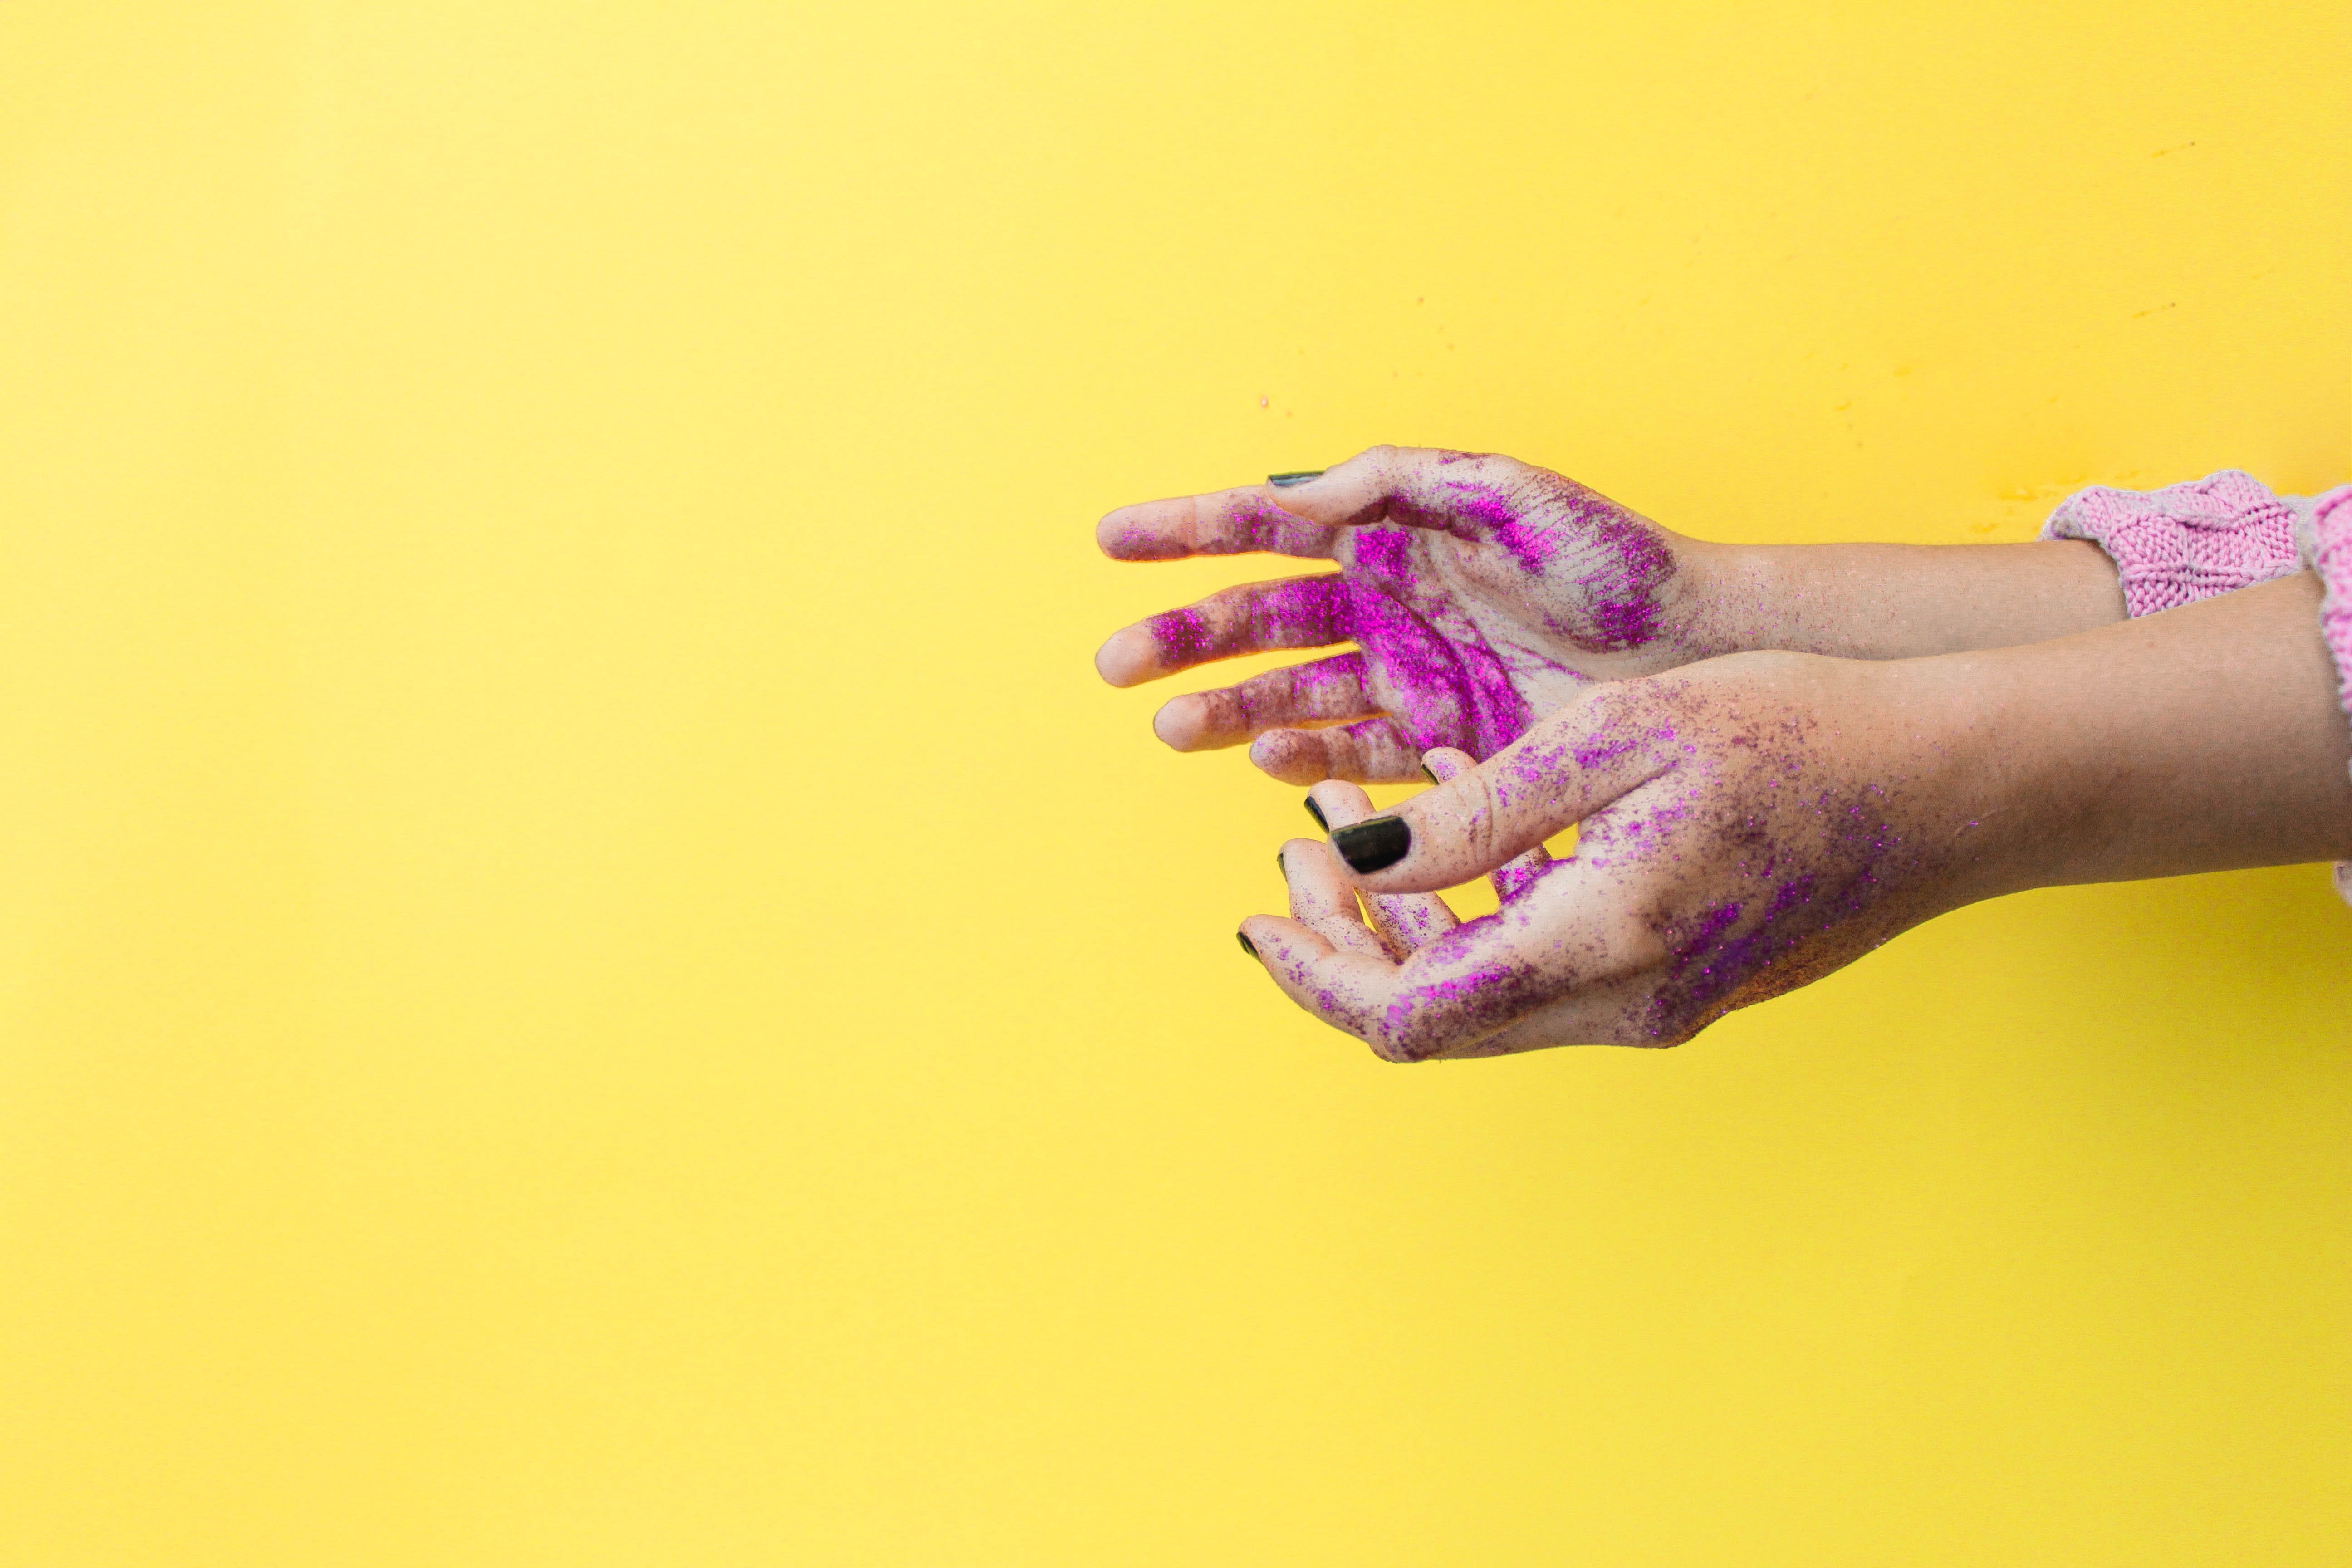 Paint-covered hands in front on a yellow background.